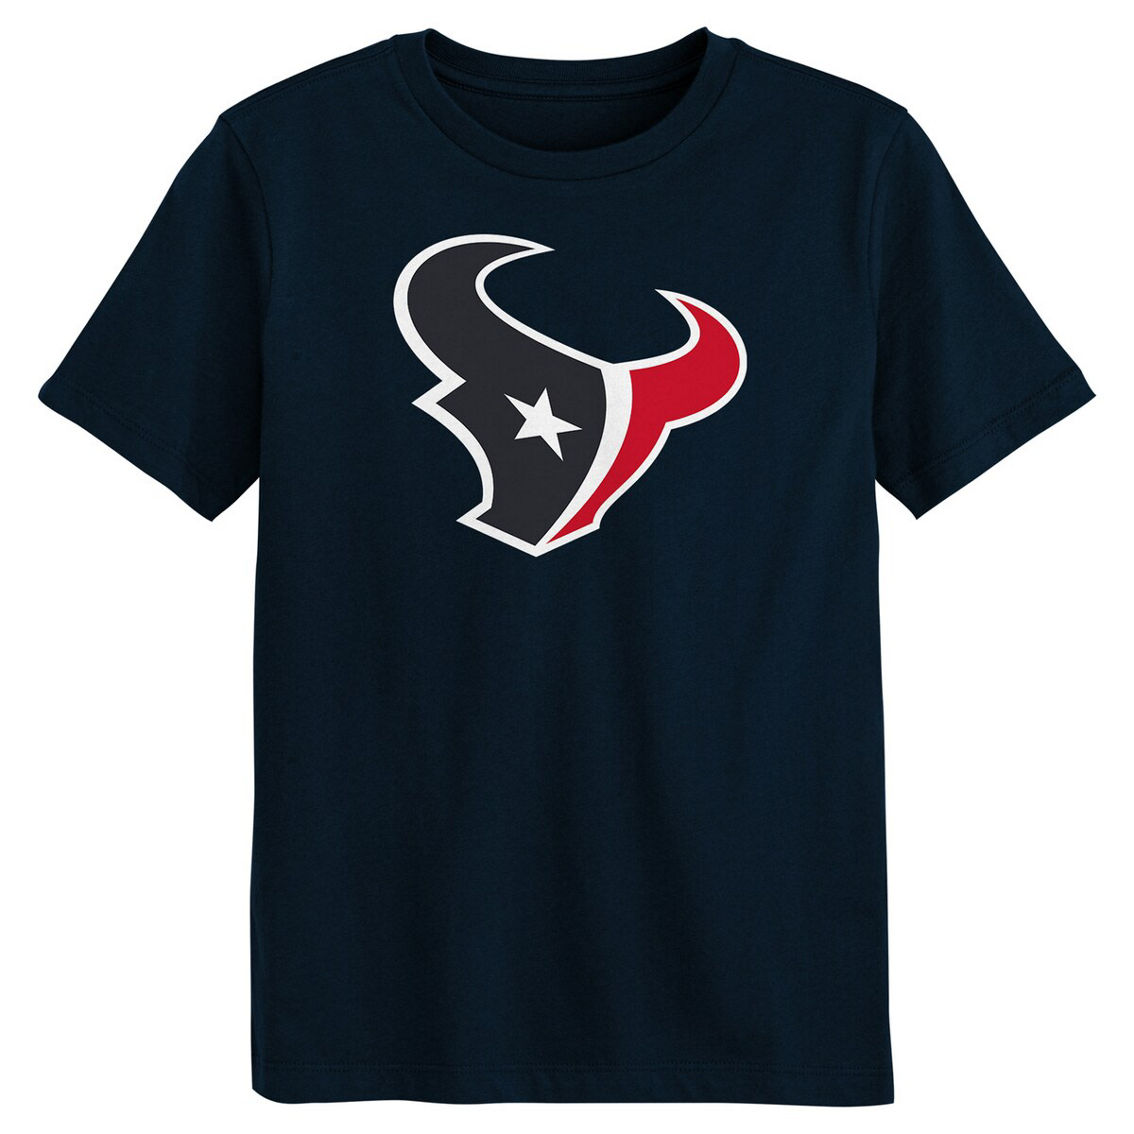 Outerstuff Juvenile Navy Houston Texans Primary Logo T-Shirt - Image 2 of 2